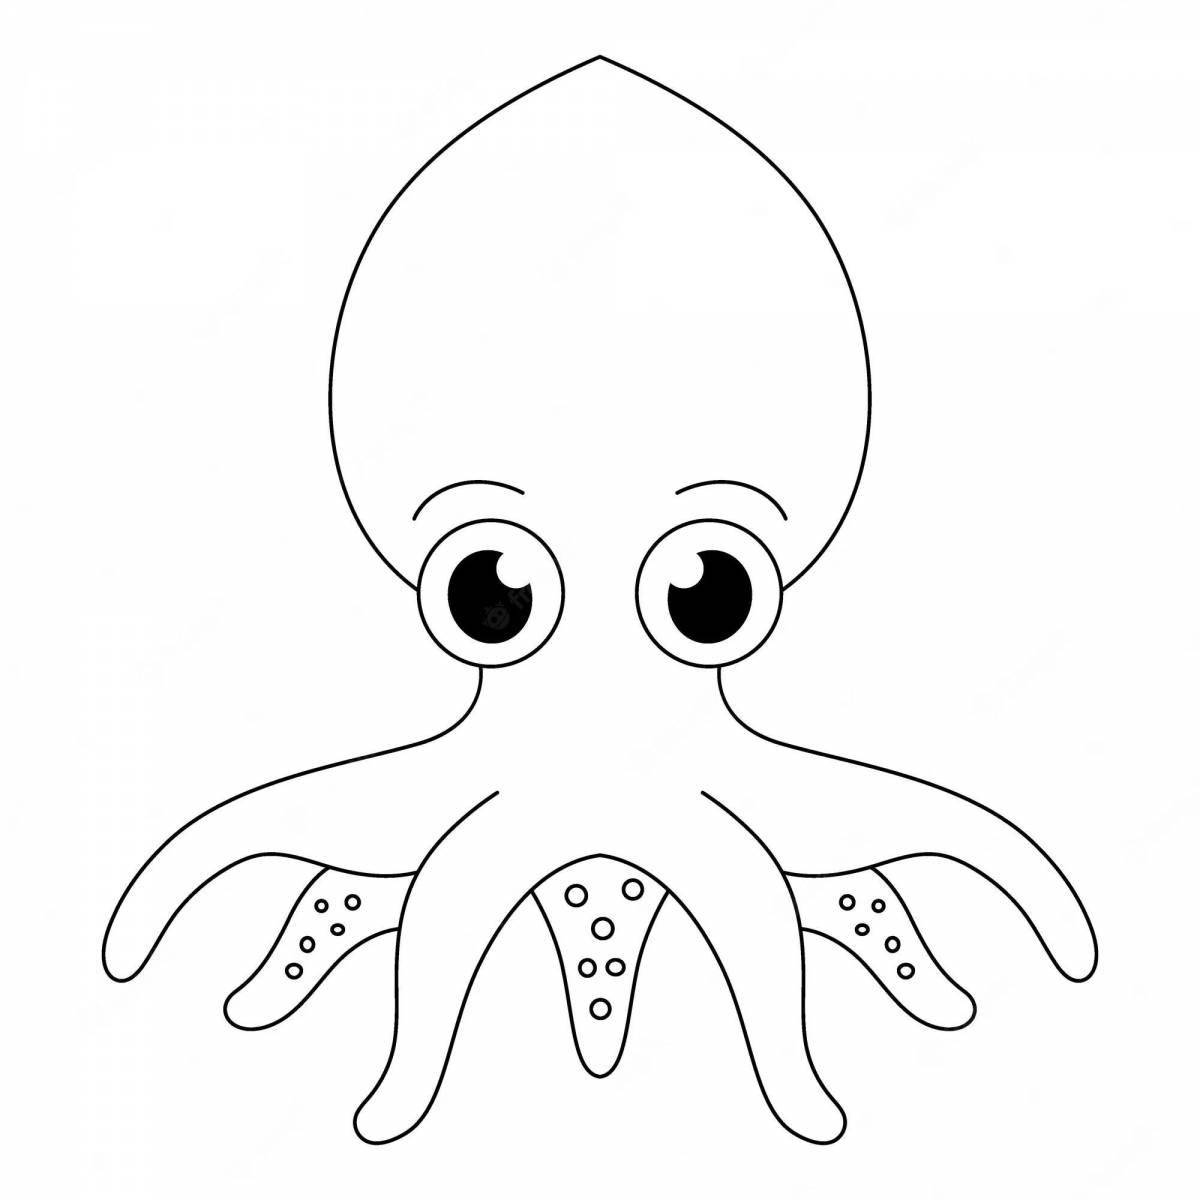 Playful octopus coloring page for kids